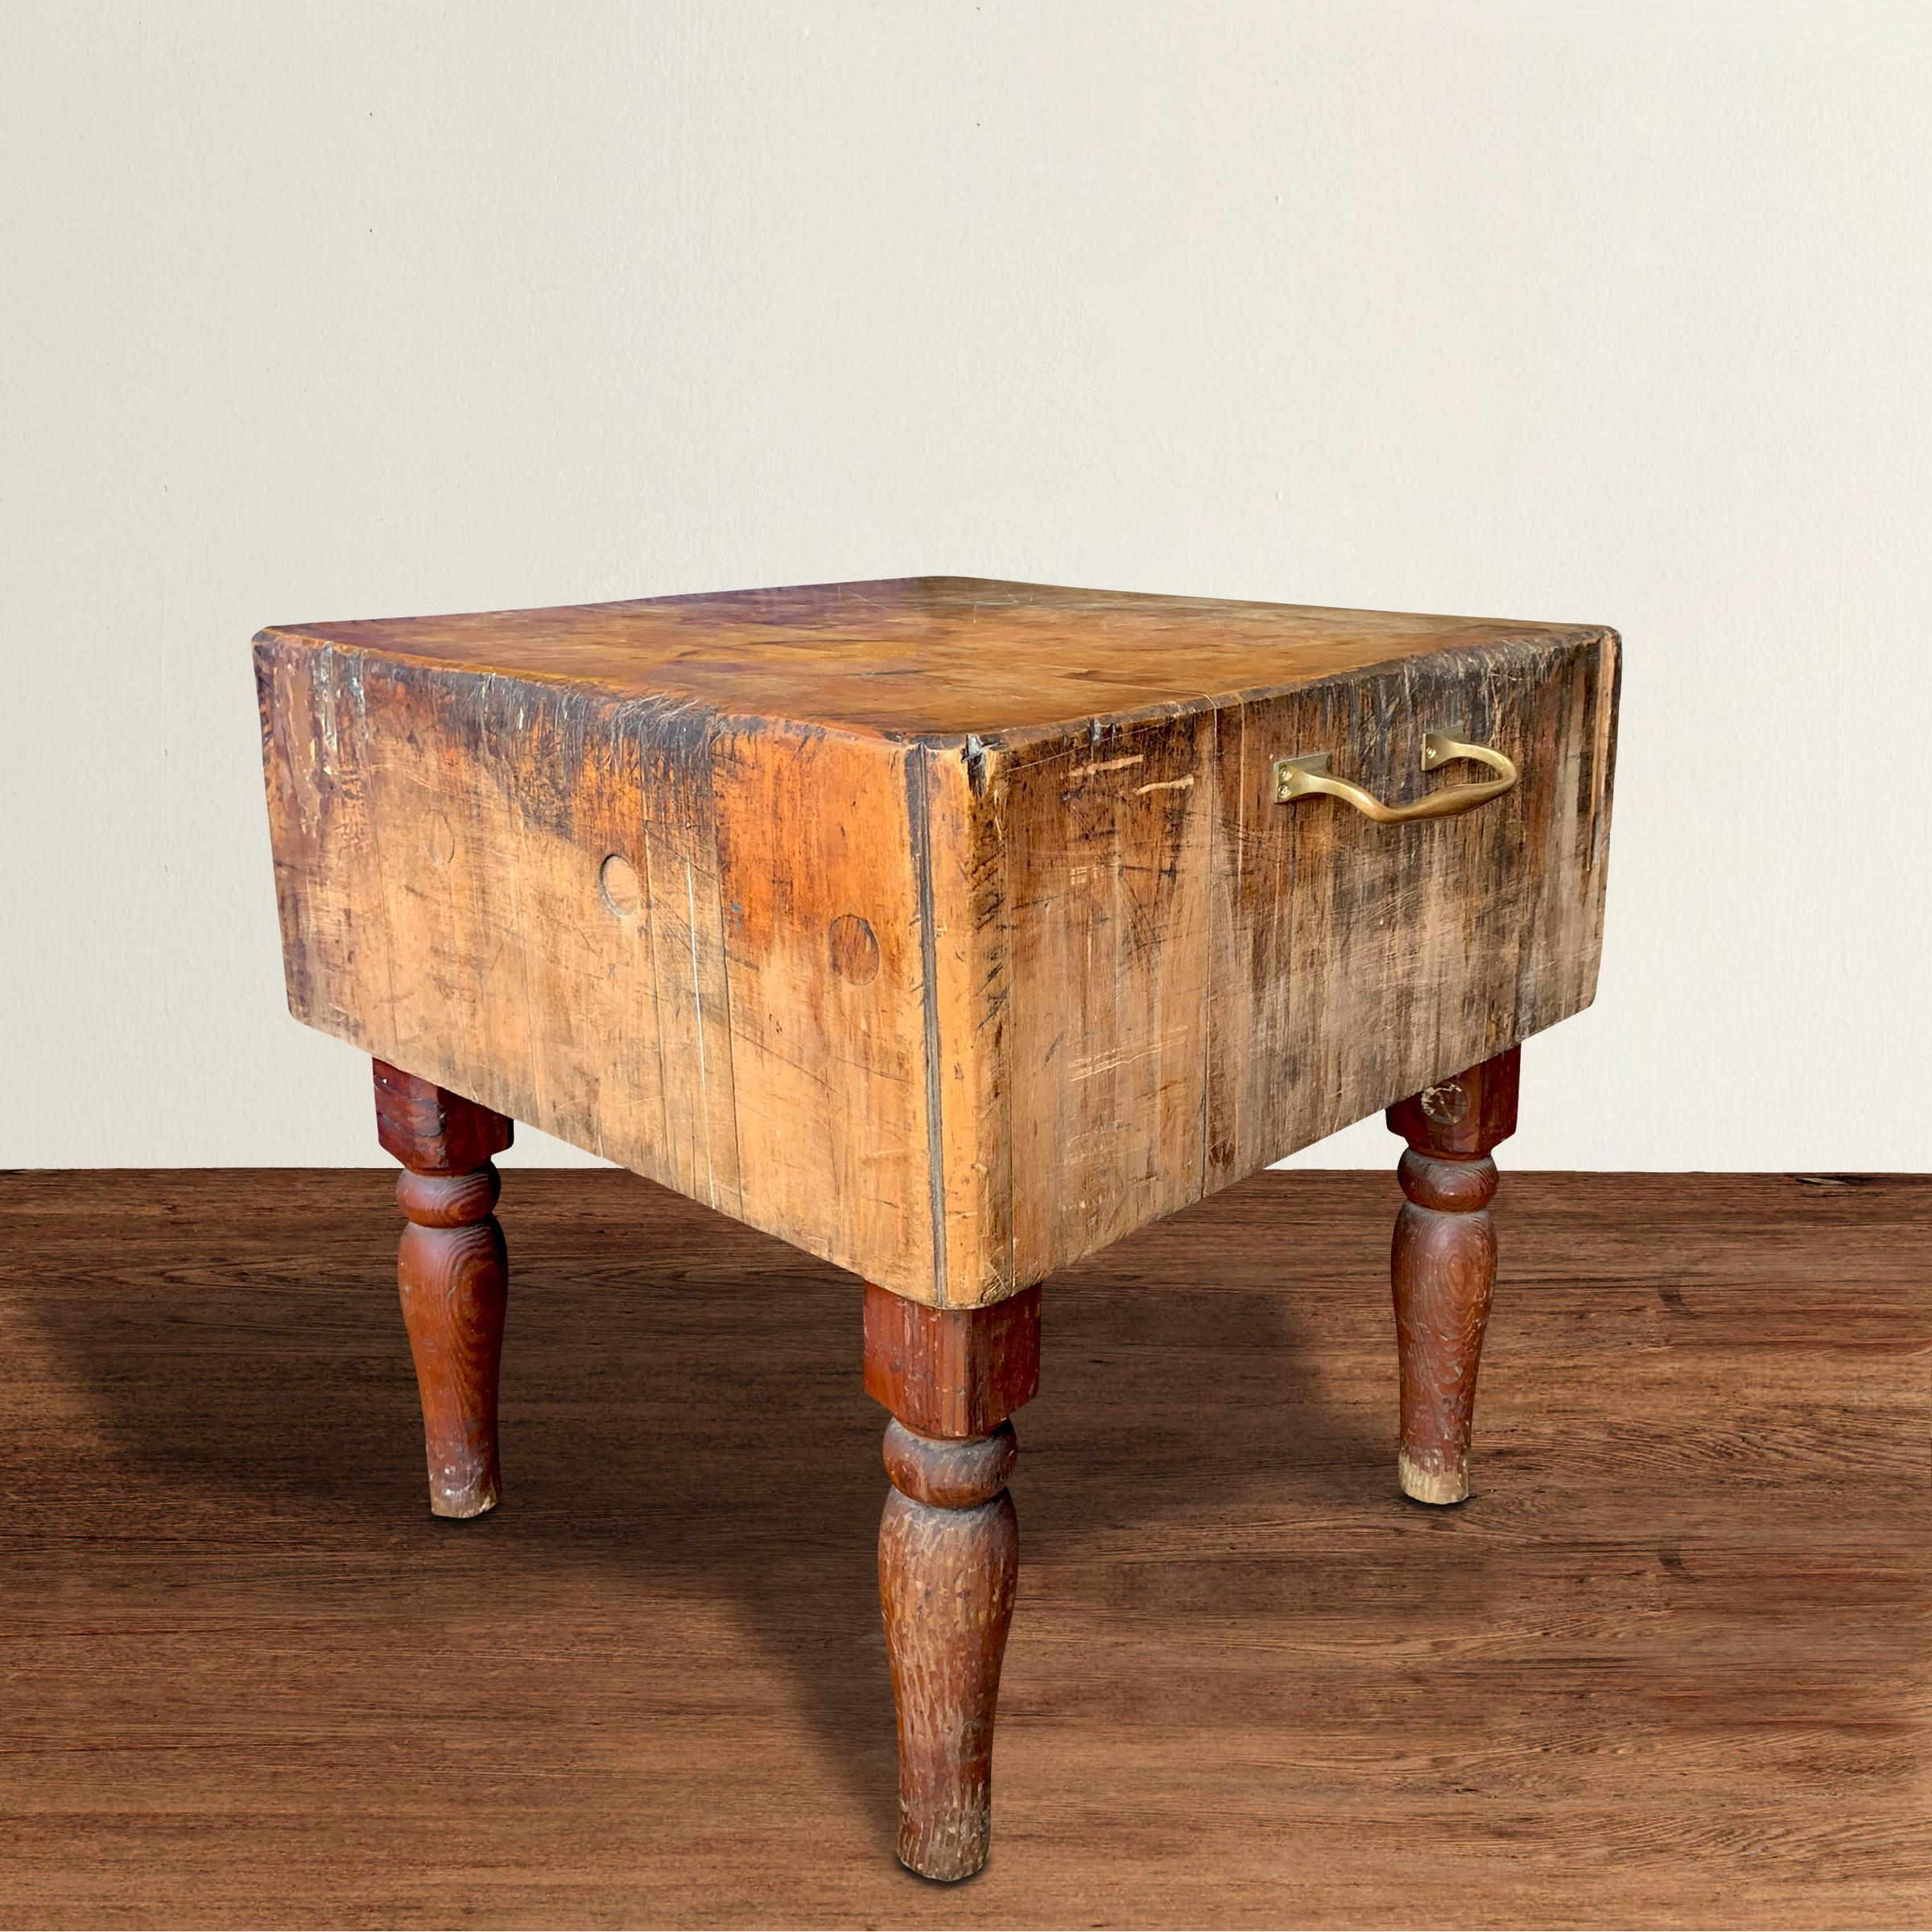 An incredible early 20th century American maple butcher block table constructed of hundreds of dove-tailed blocks puzzle-pieced together, with a bronze towel bar on one side, and with a wonderful patina only time can bestow. The block rests on four